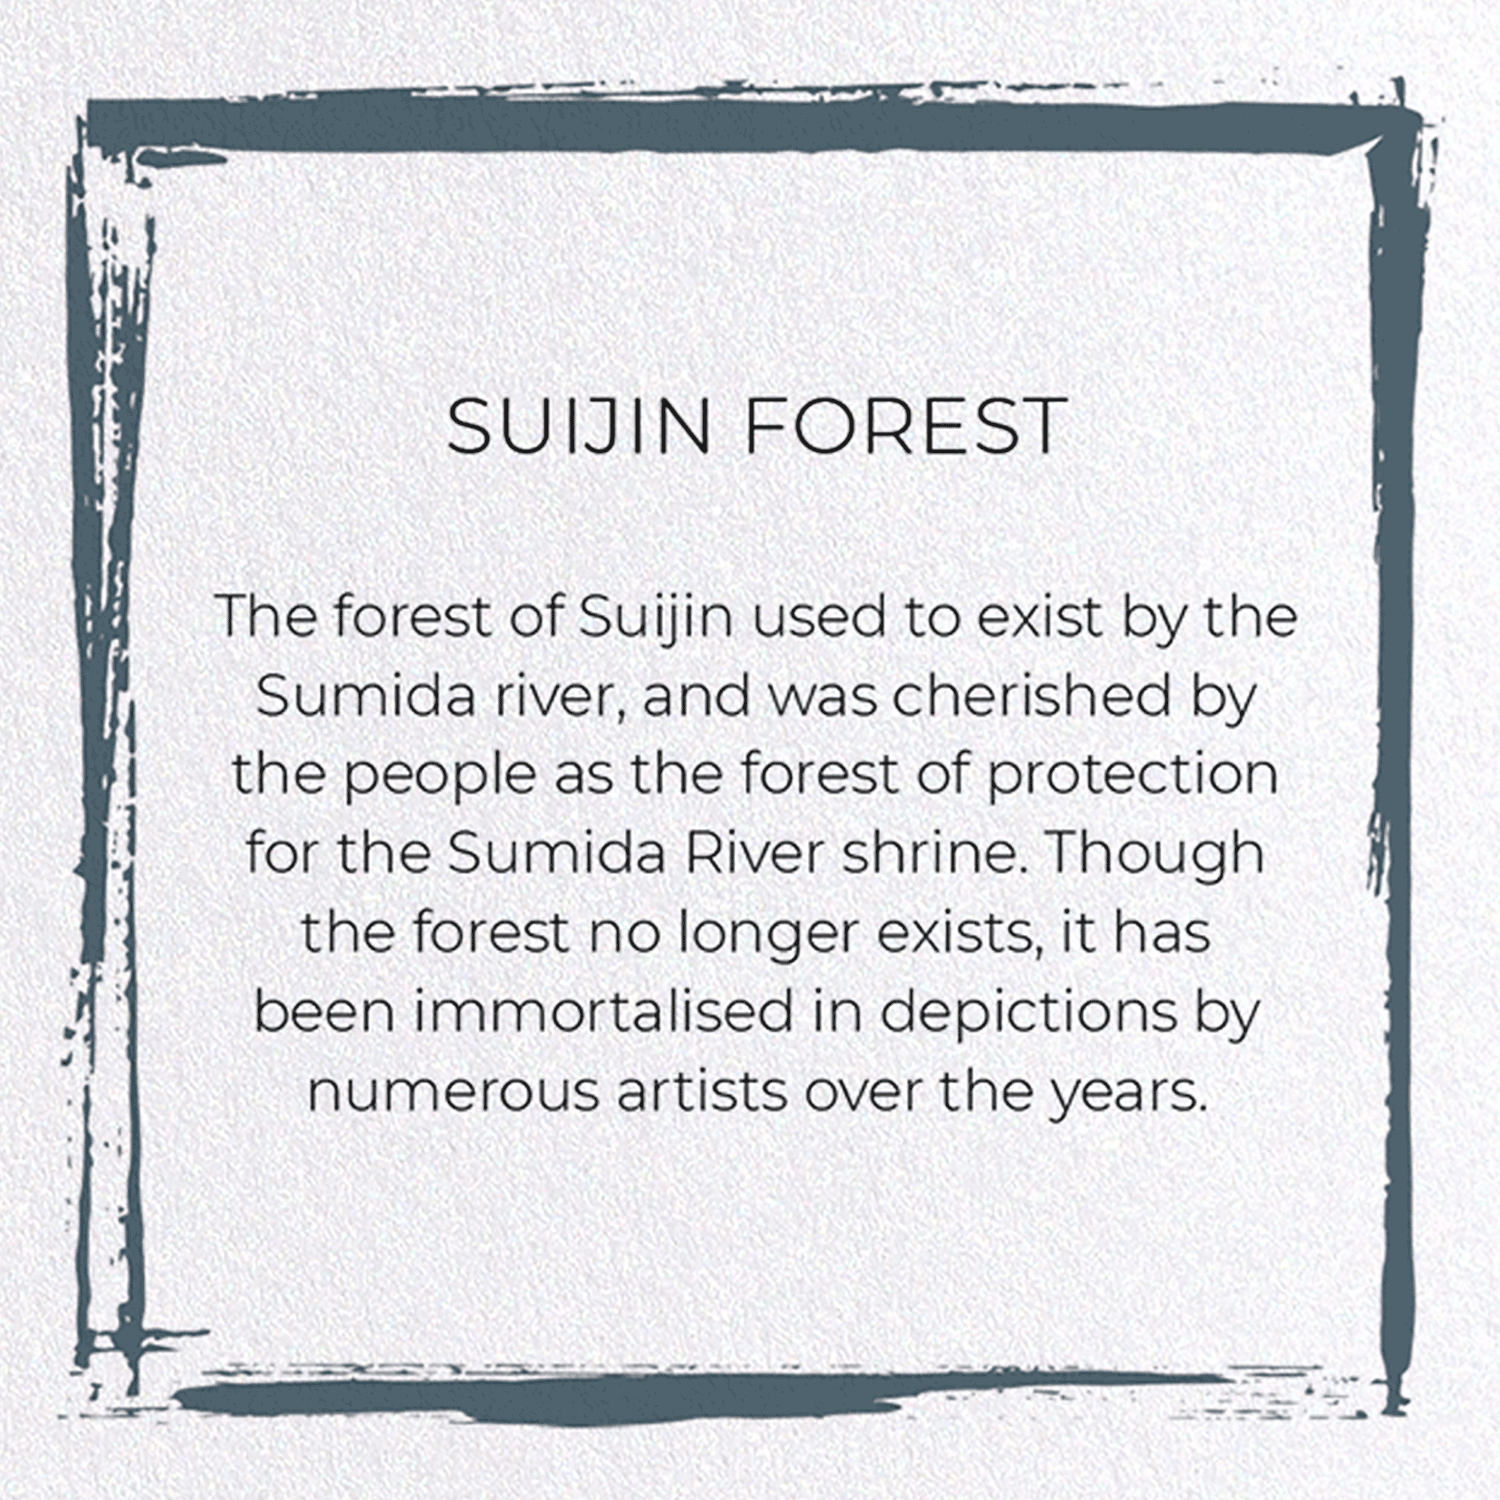 SUIJIN FOREST